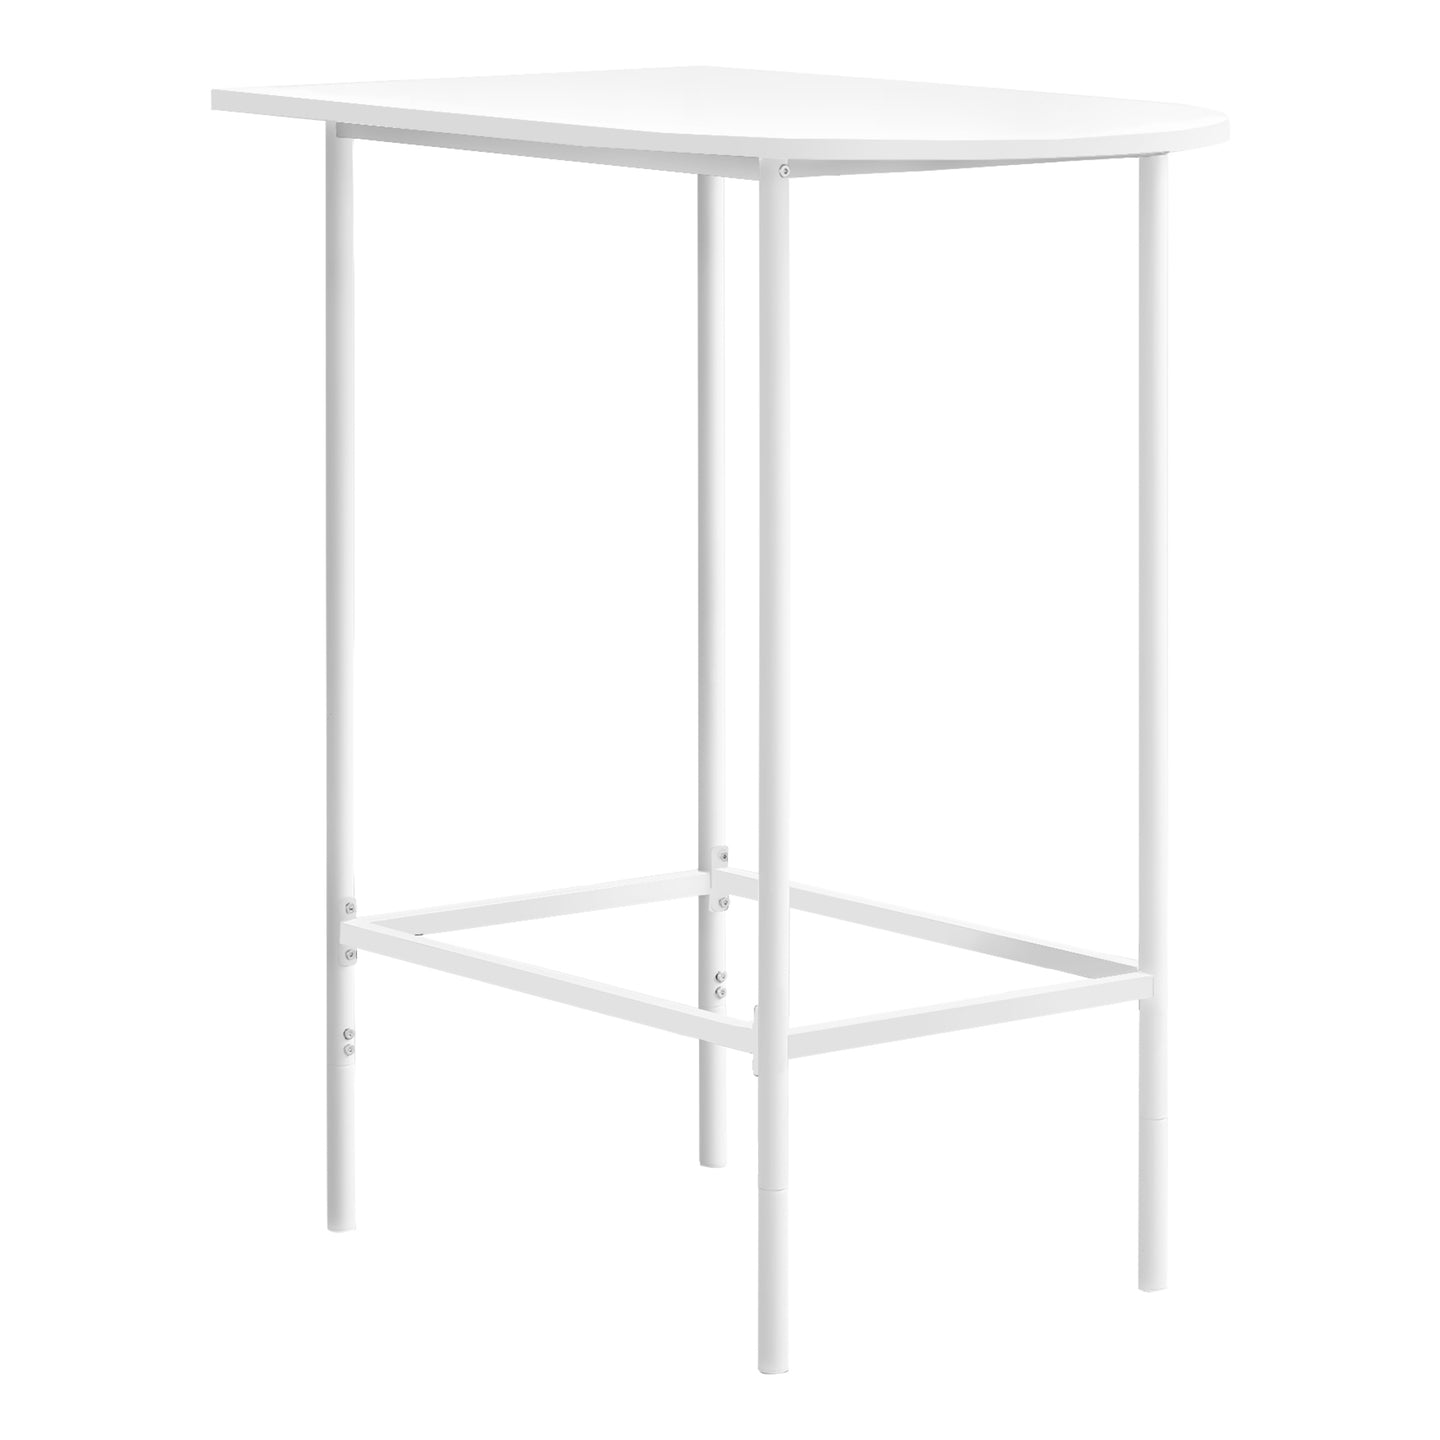 I 2376 Home Bar - 24"X 36" / White Top And Metal Spacesaver - Furniture Depot (7881091219704)